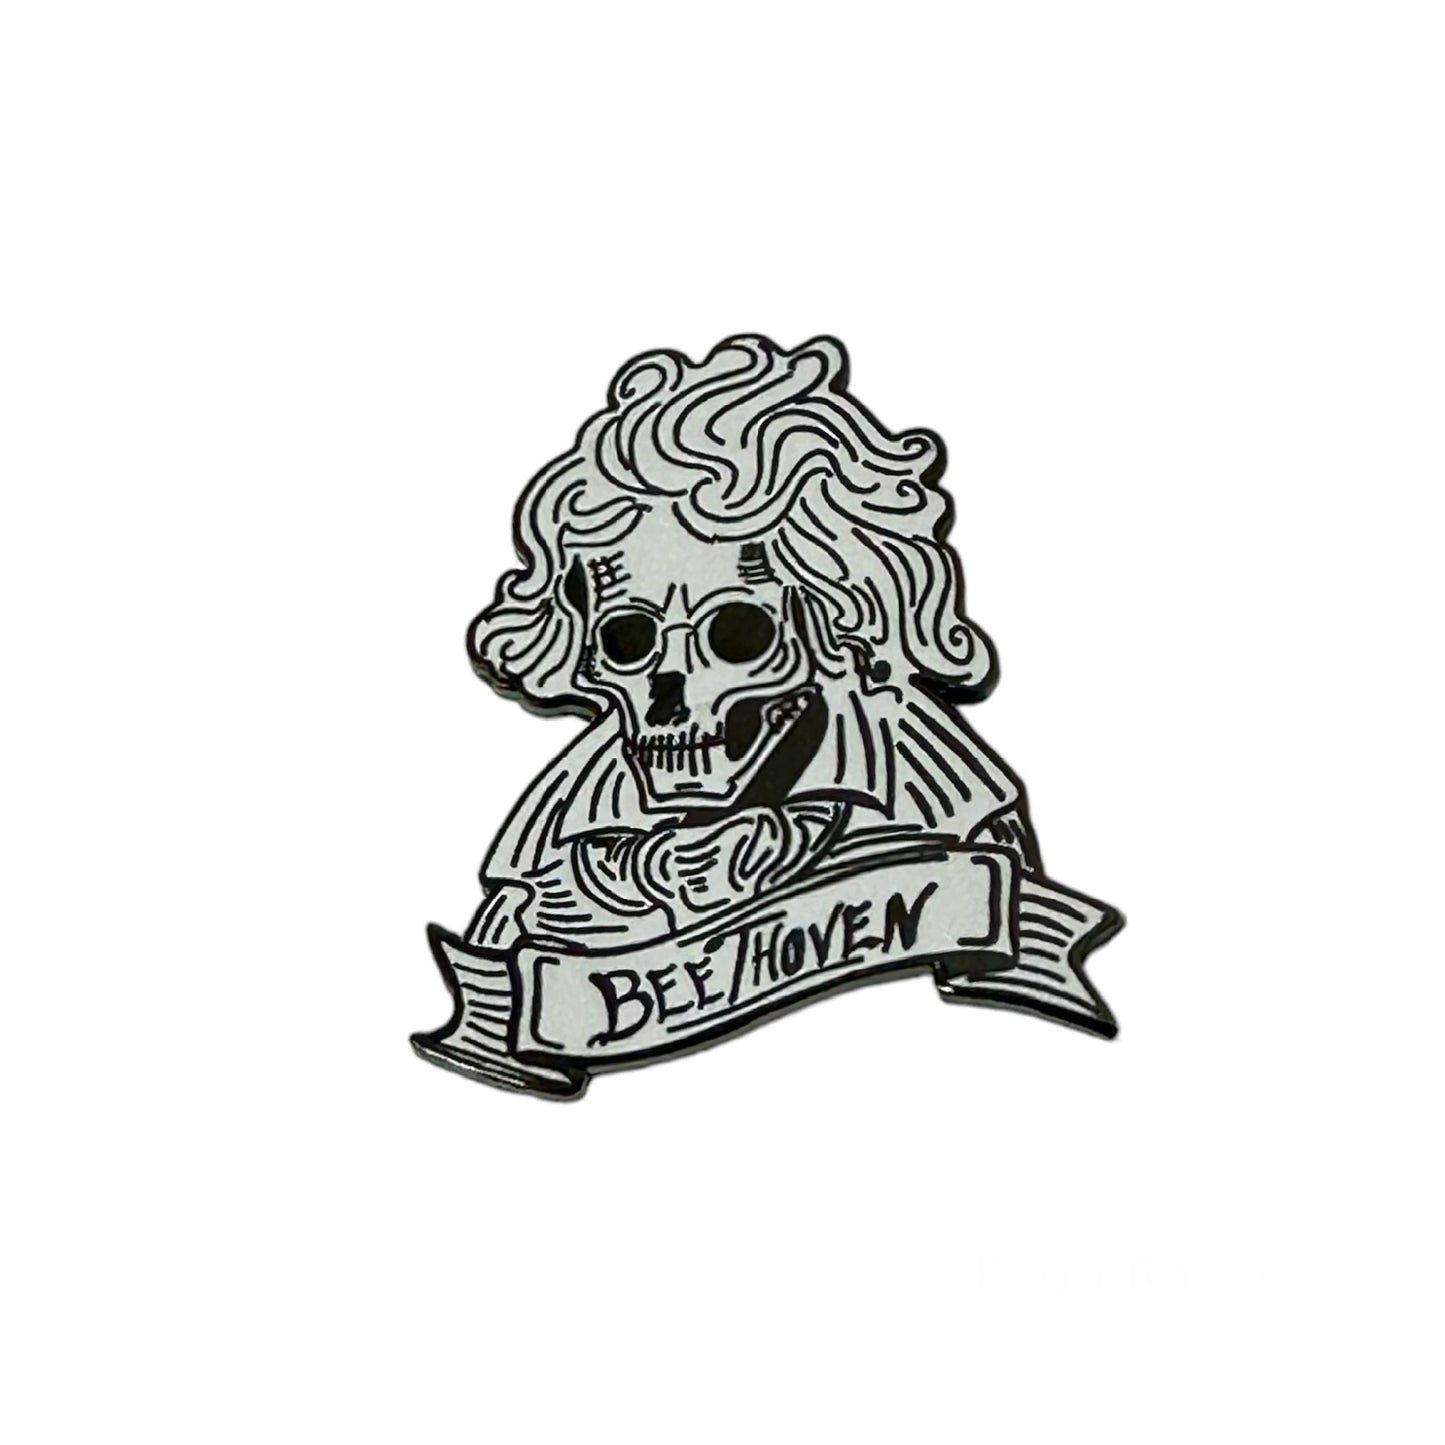 Beethoven Decomposition Pin